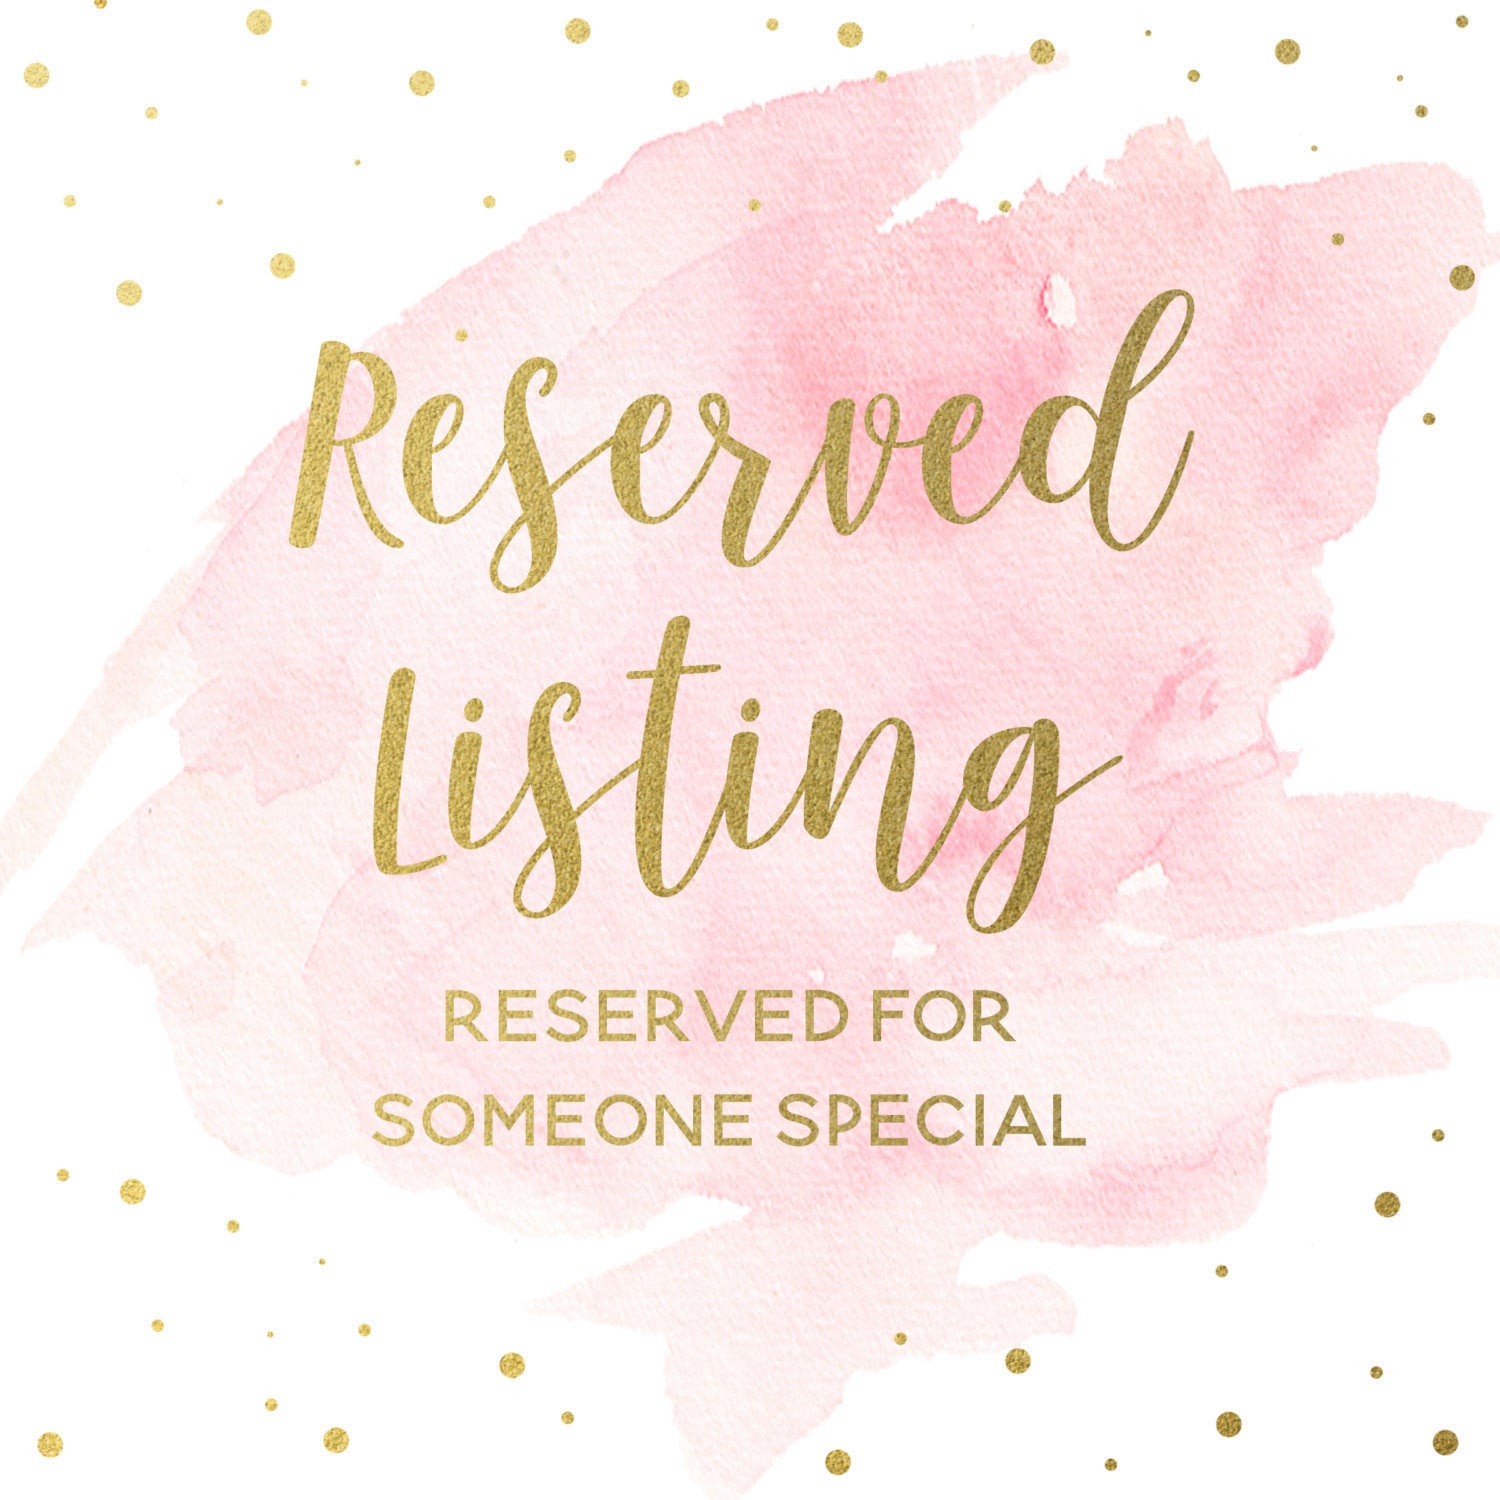 Reserved Listing - Alicia T